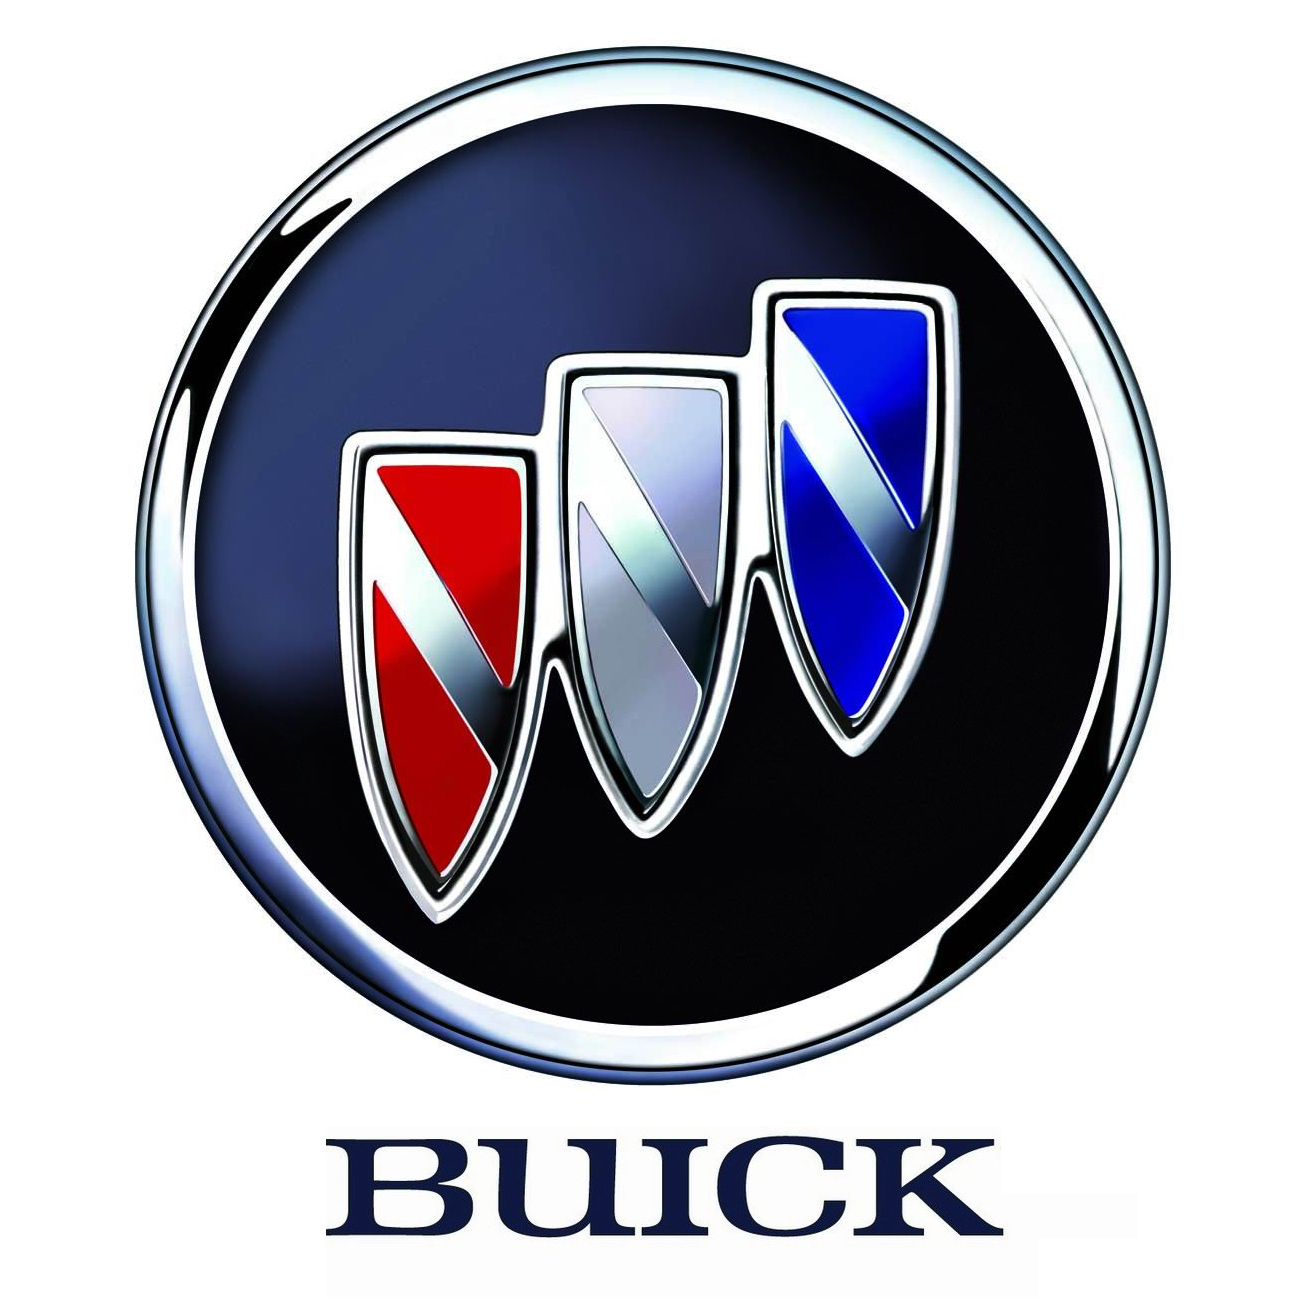 Buick Logo - Vintage Transmissions by Russ Sylvis